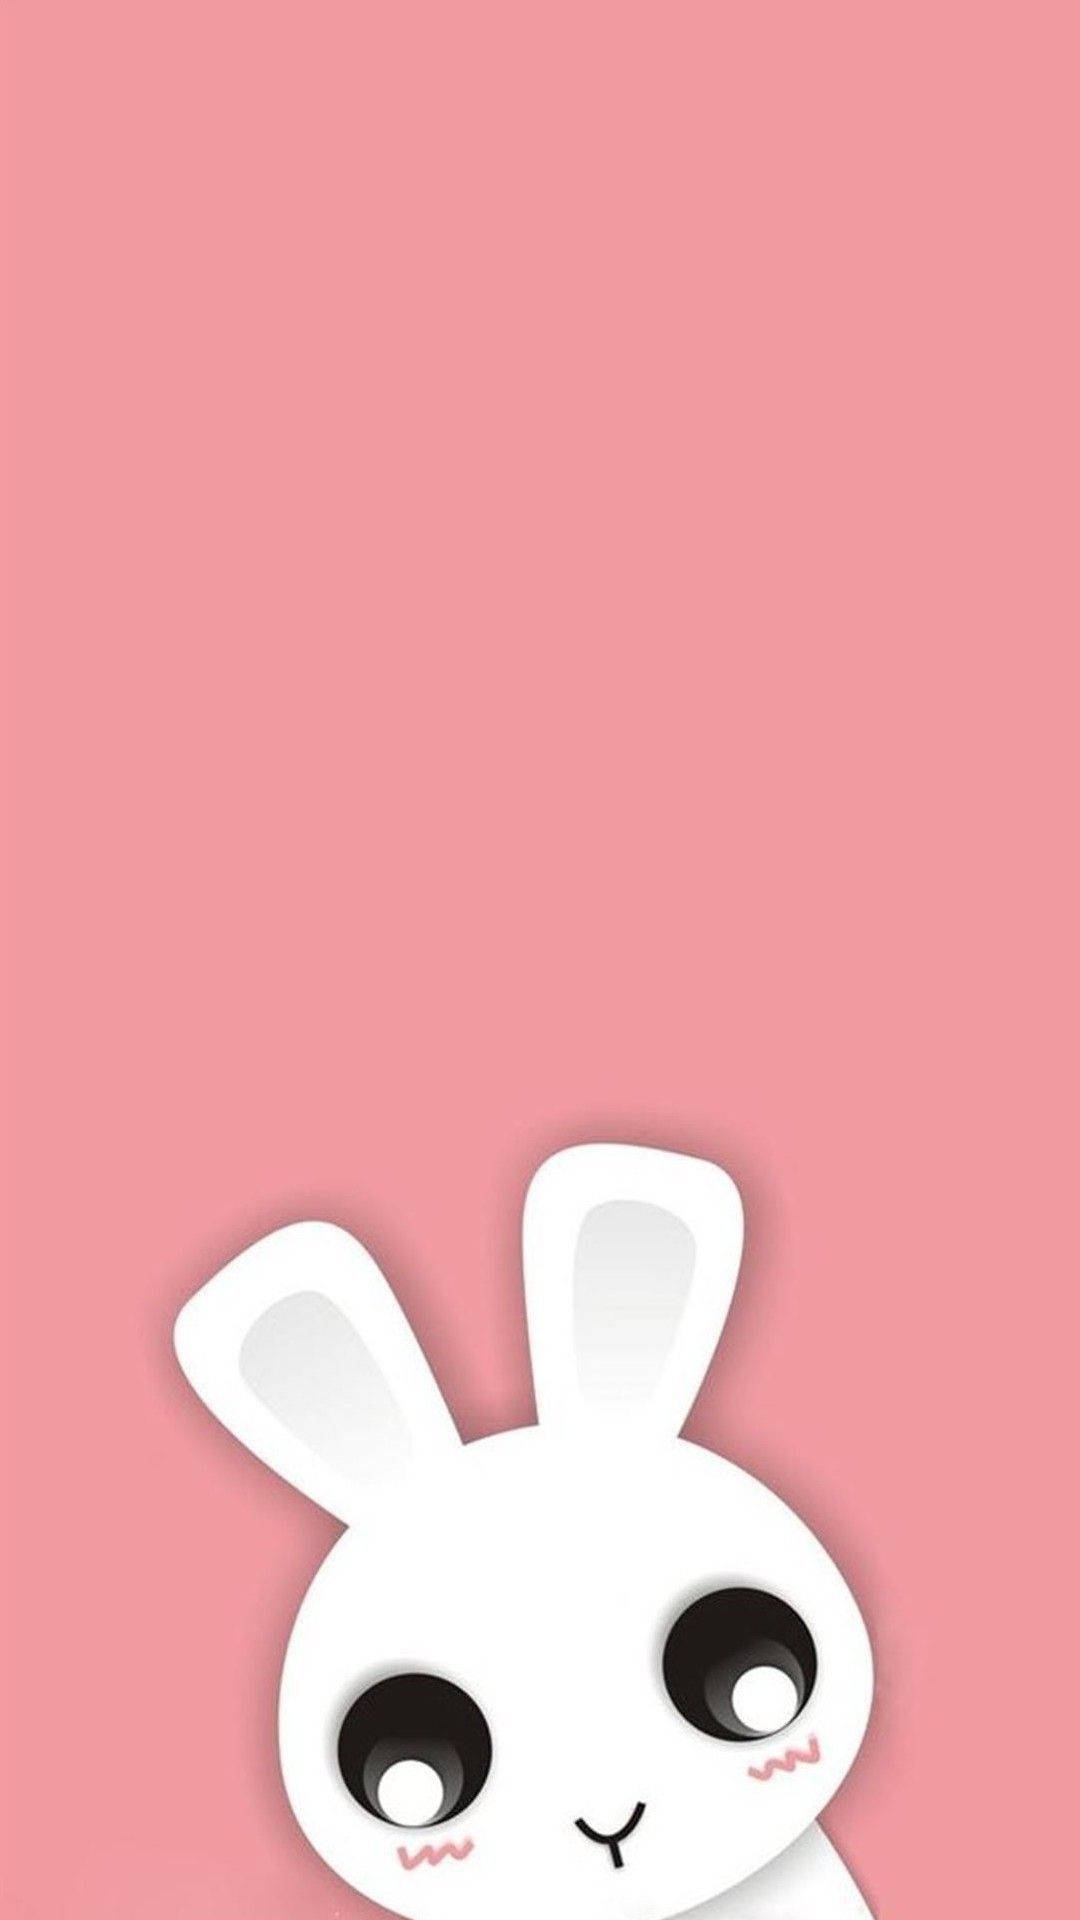 White Rabbit Cute Android Wallpaper